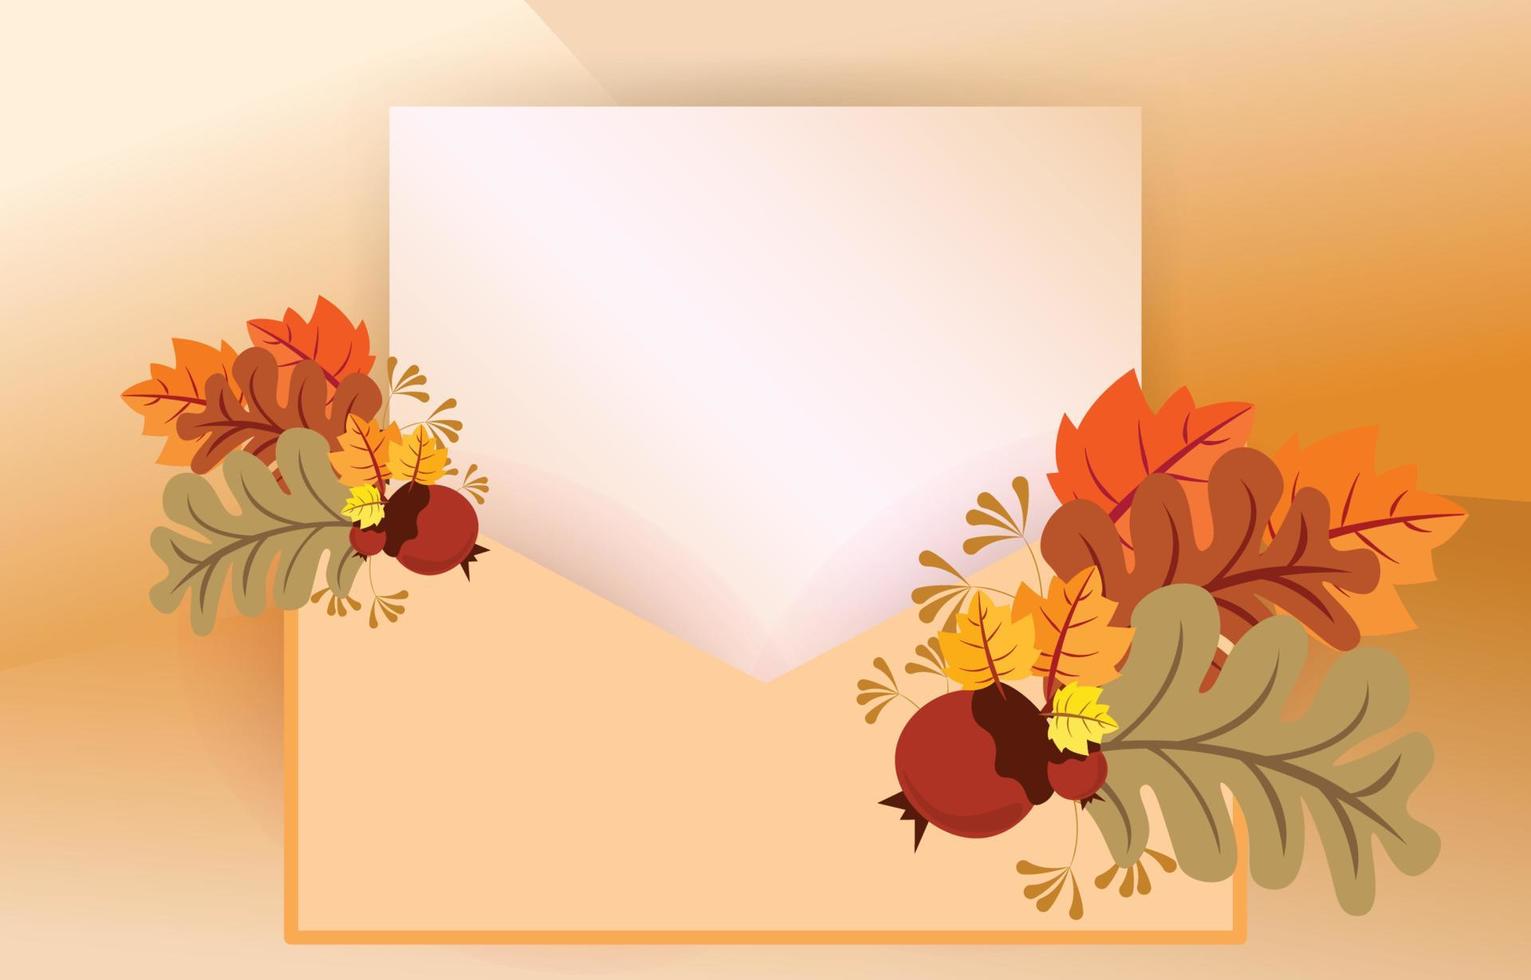 Autumn background with leaves golden yellow with letter square frames, and free space ,fall concept,For wallpaper, postcards, greeting cards, website pages, banners, online sales. Vector illustration